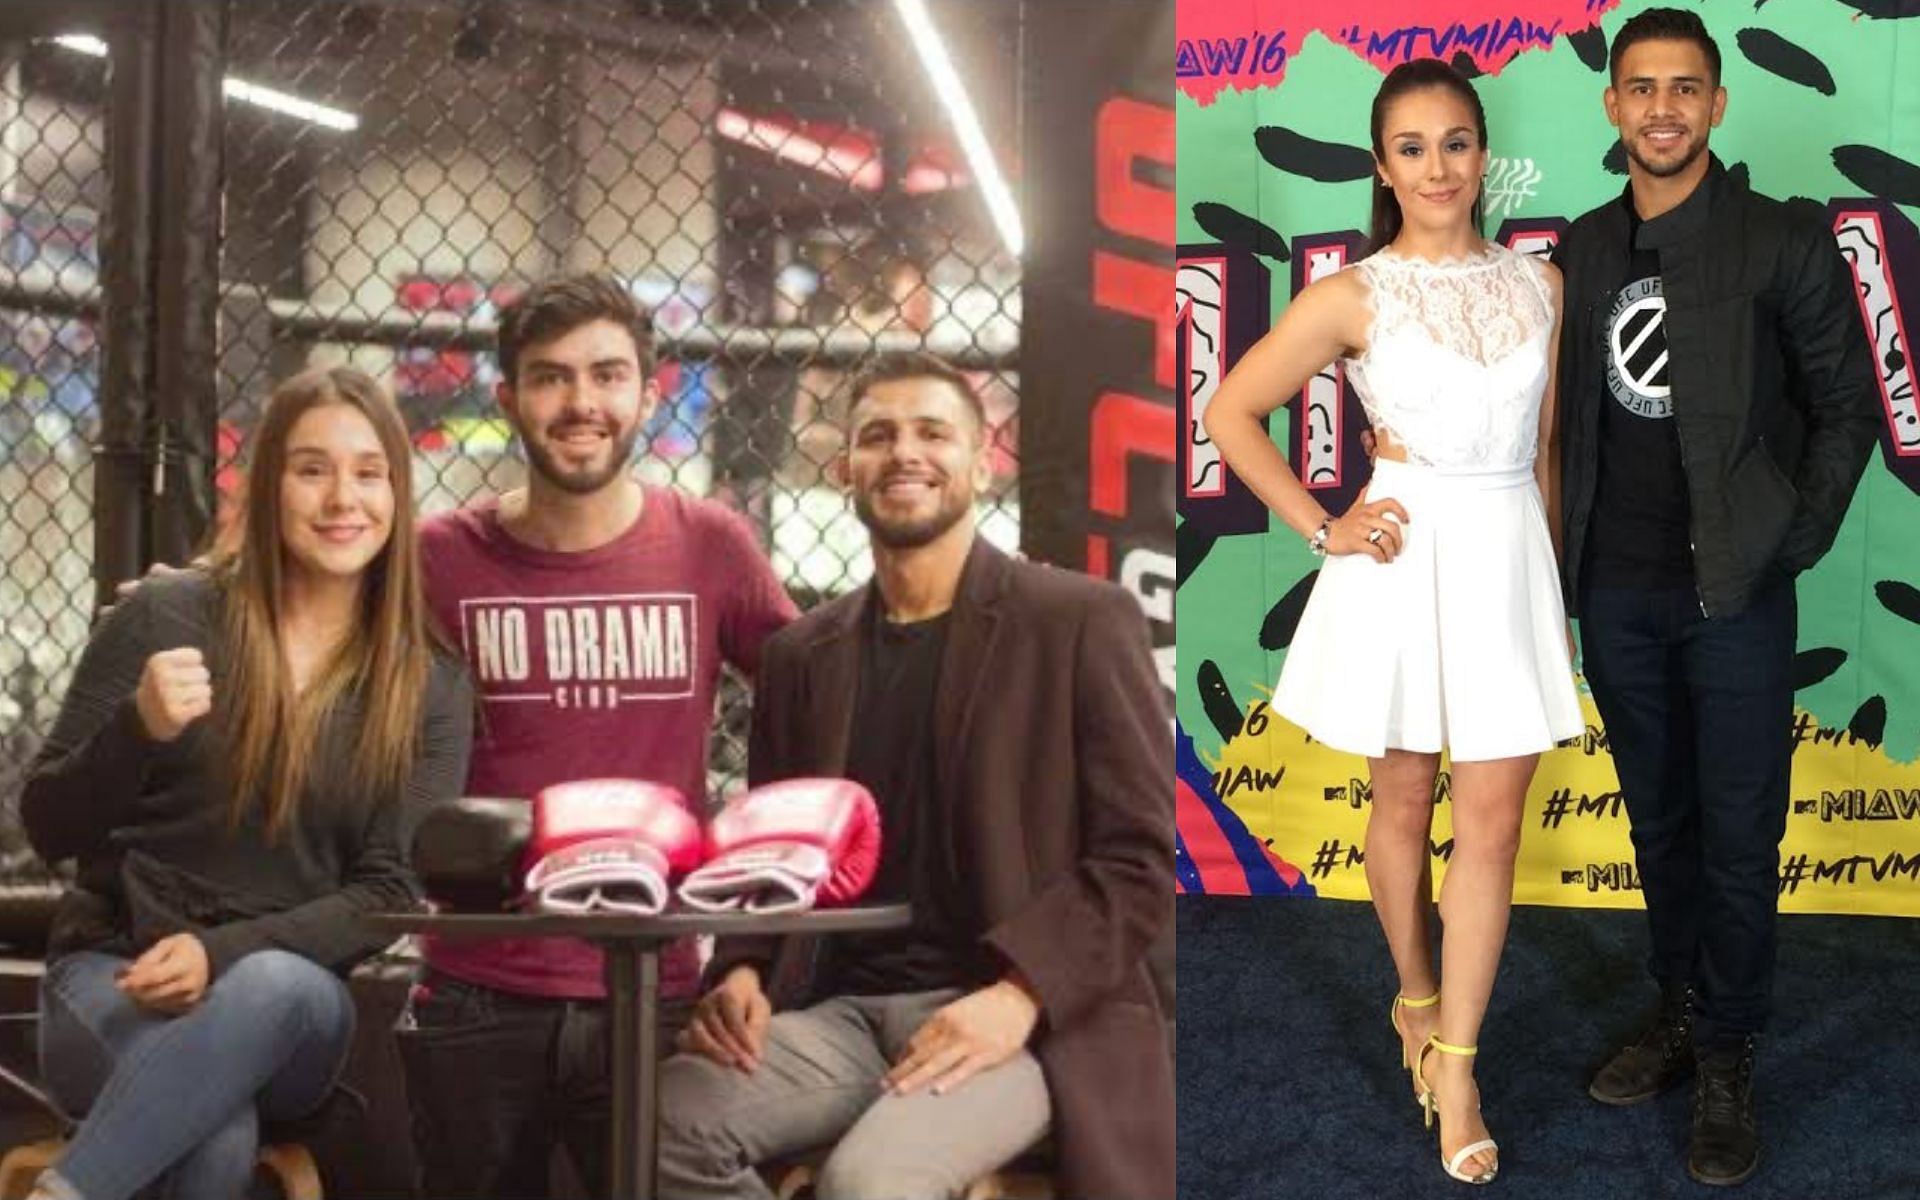 Alexa Grasso with Yair Rodriguez. [Images courtesy: left image from YouTube GRUPOUFCG and right image from Reddit r/WMMA]